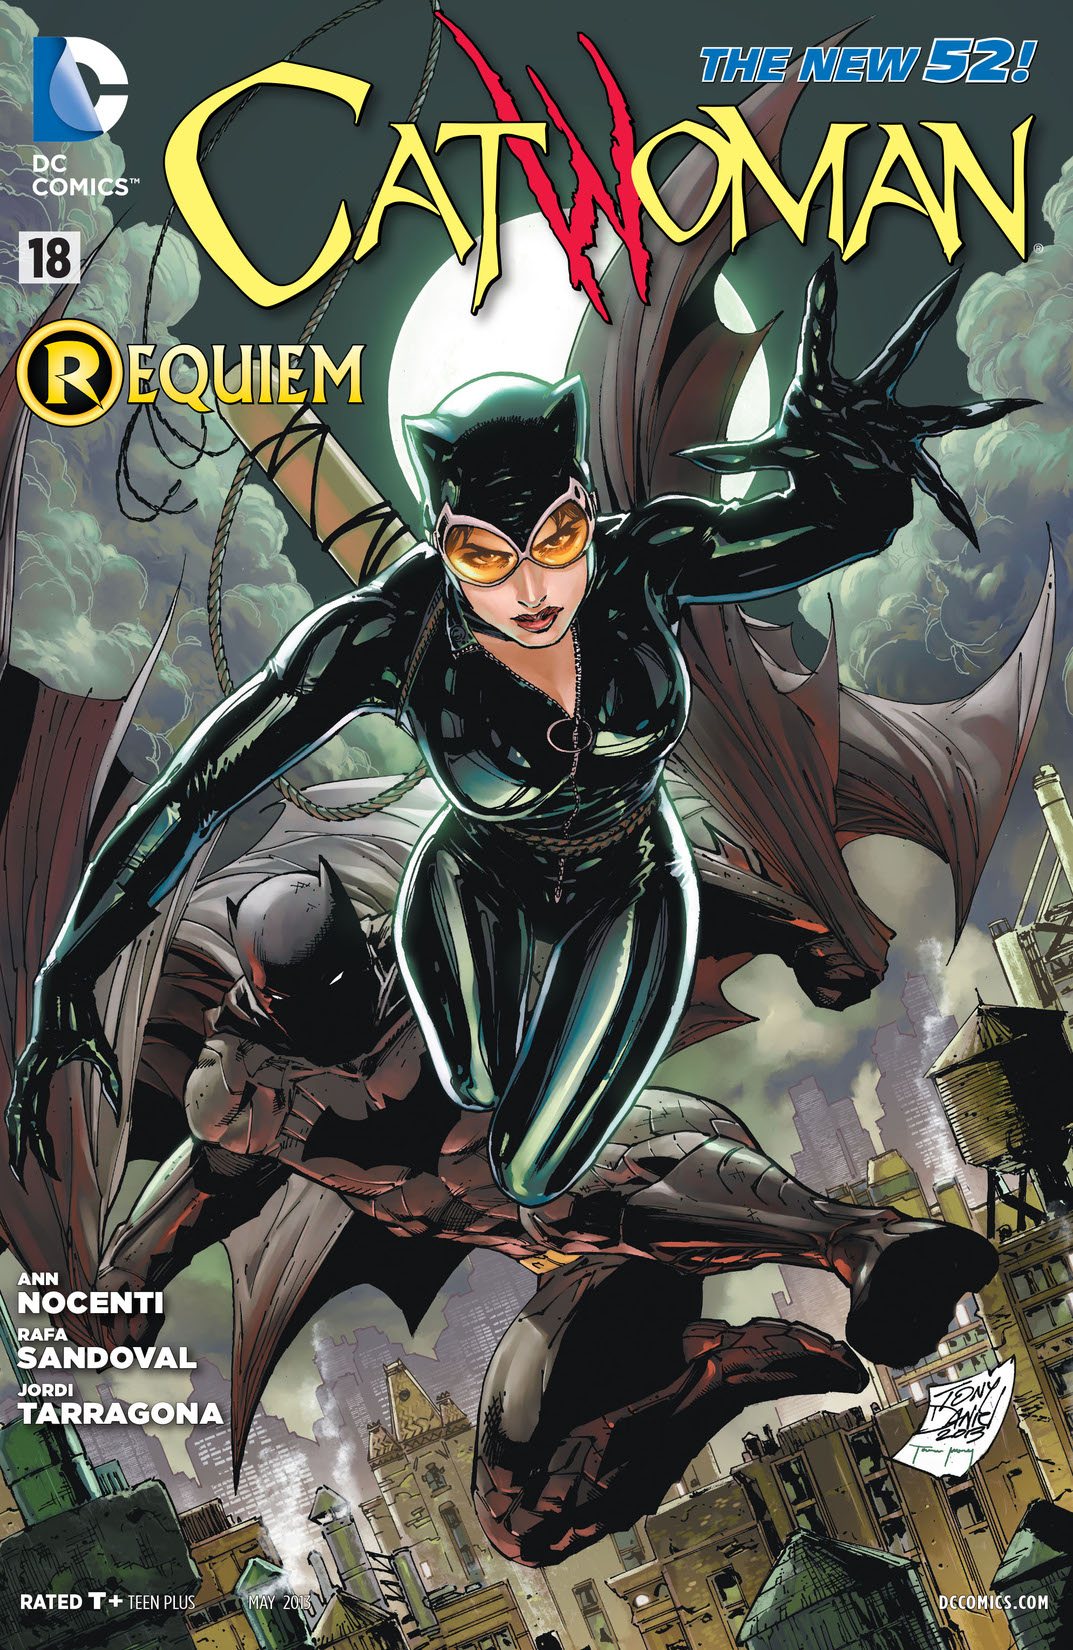 Catwoman (2011-) #18 preview images